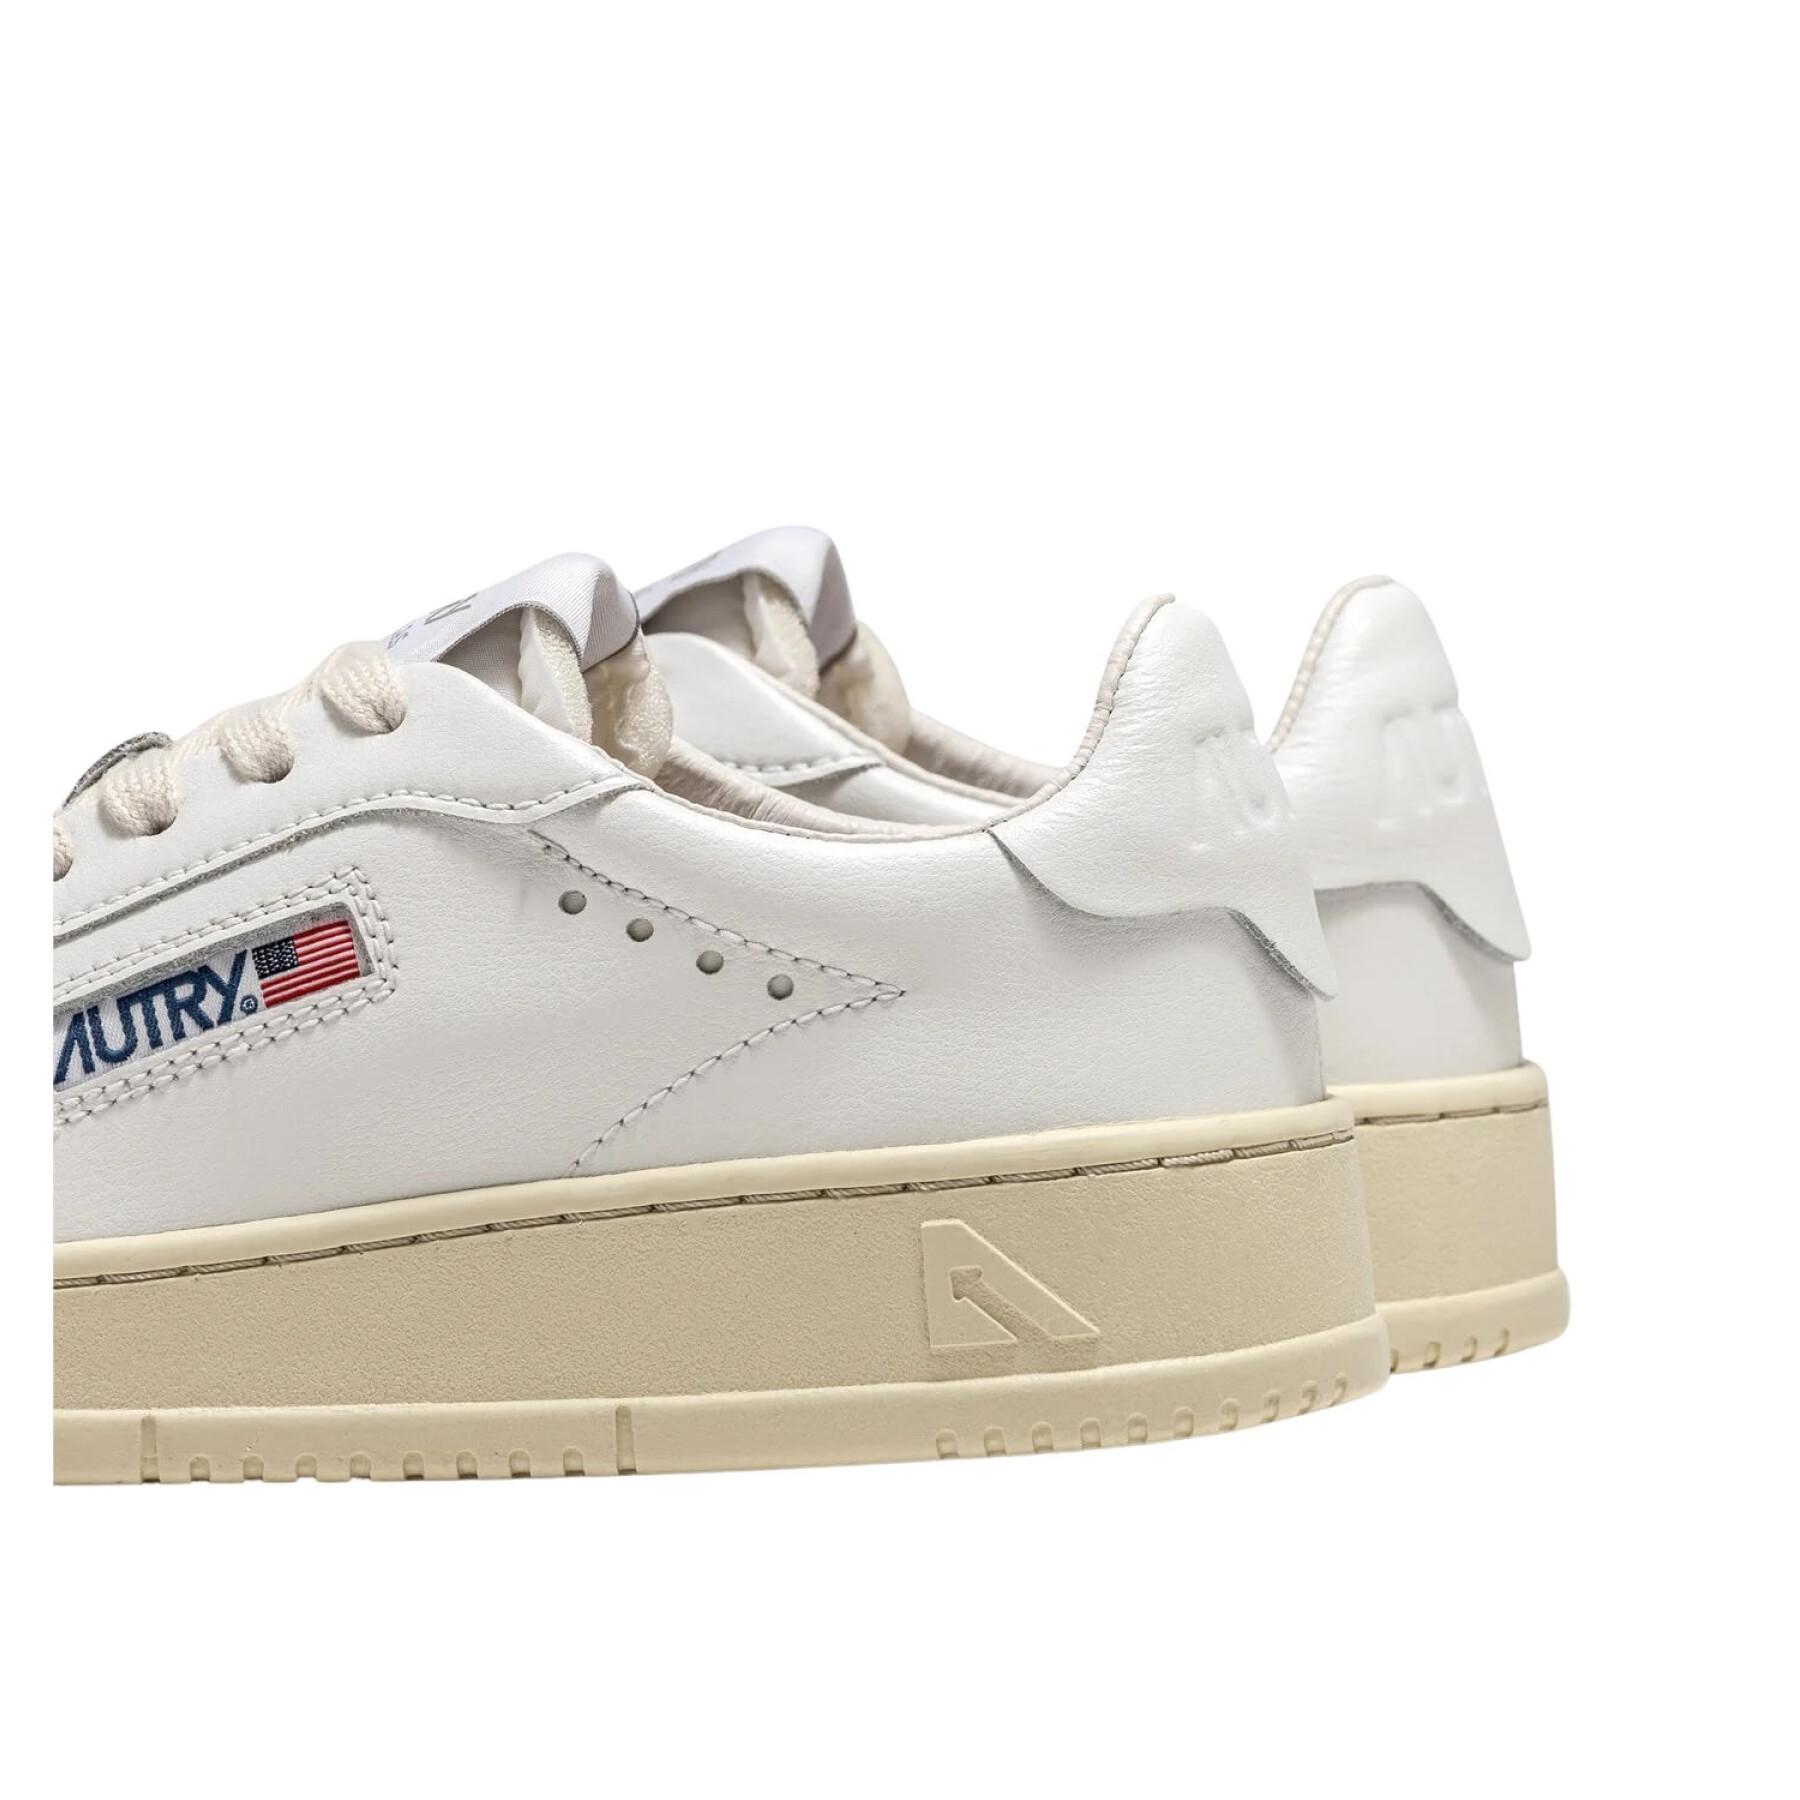 Trainers Autry Dallas Low Leather/Leather White/White